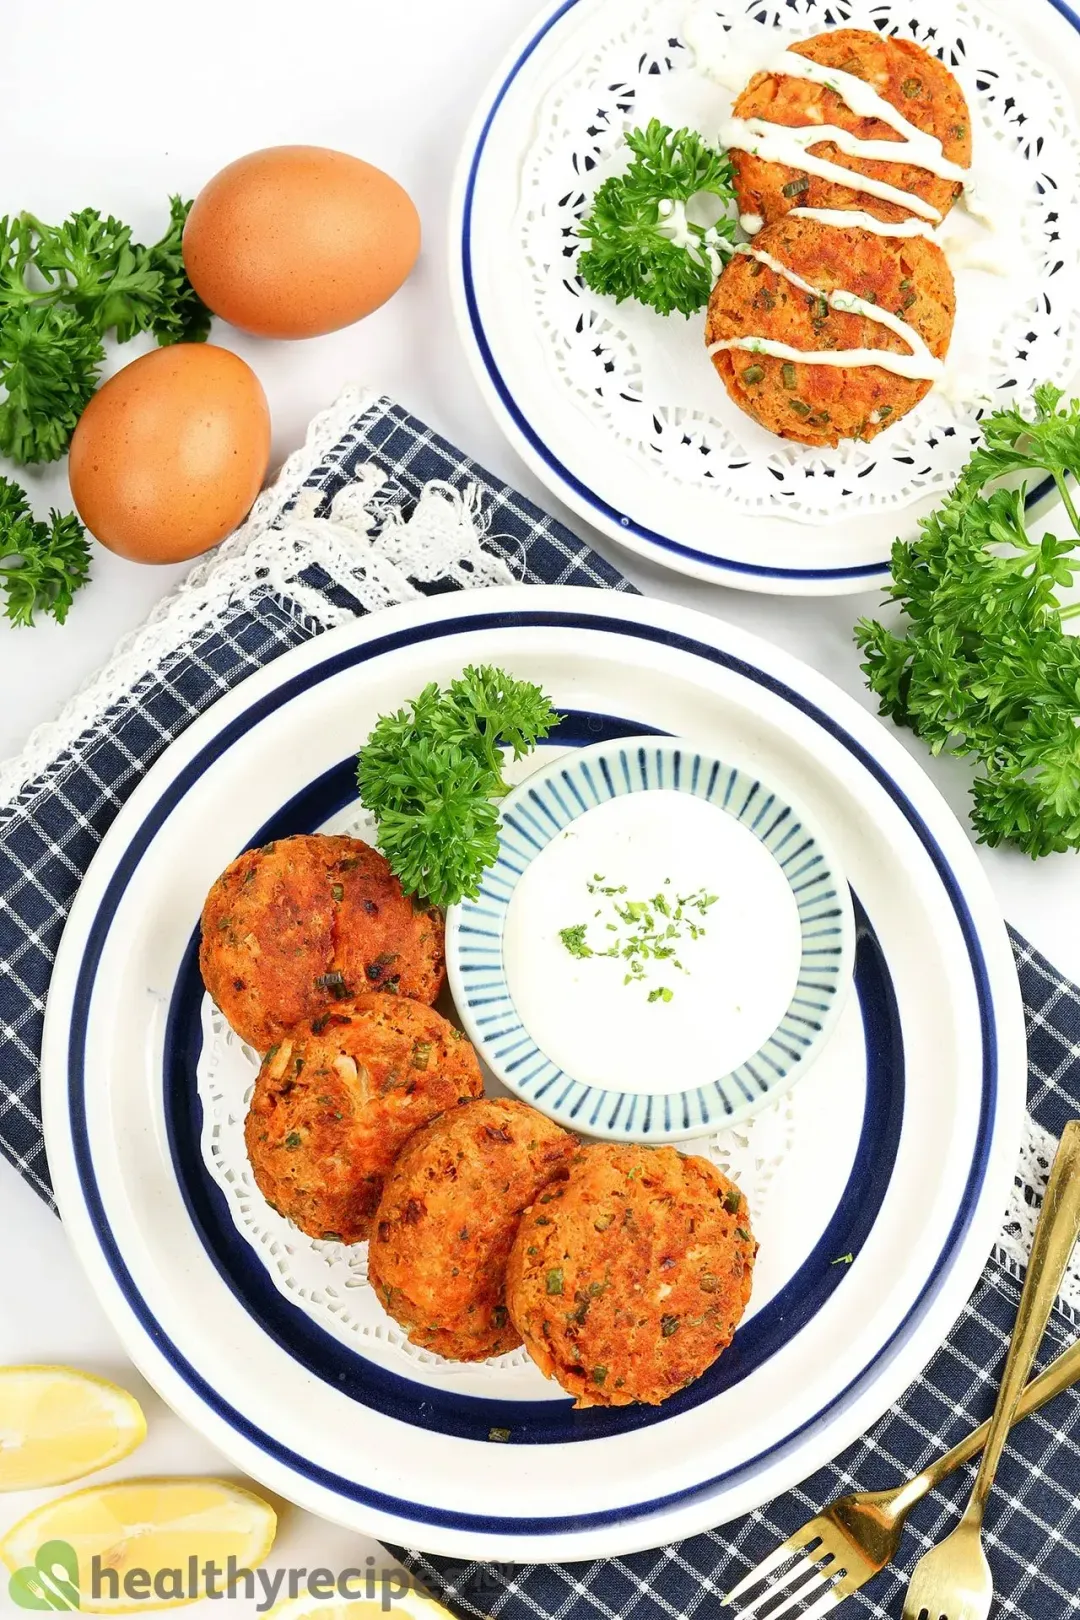 Two plates of fried salmon patties with the white yogurt sauce and some egg and parsley for decoration.